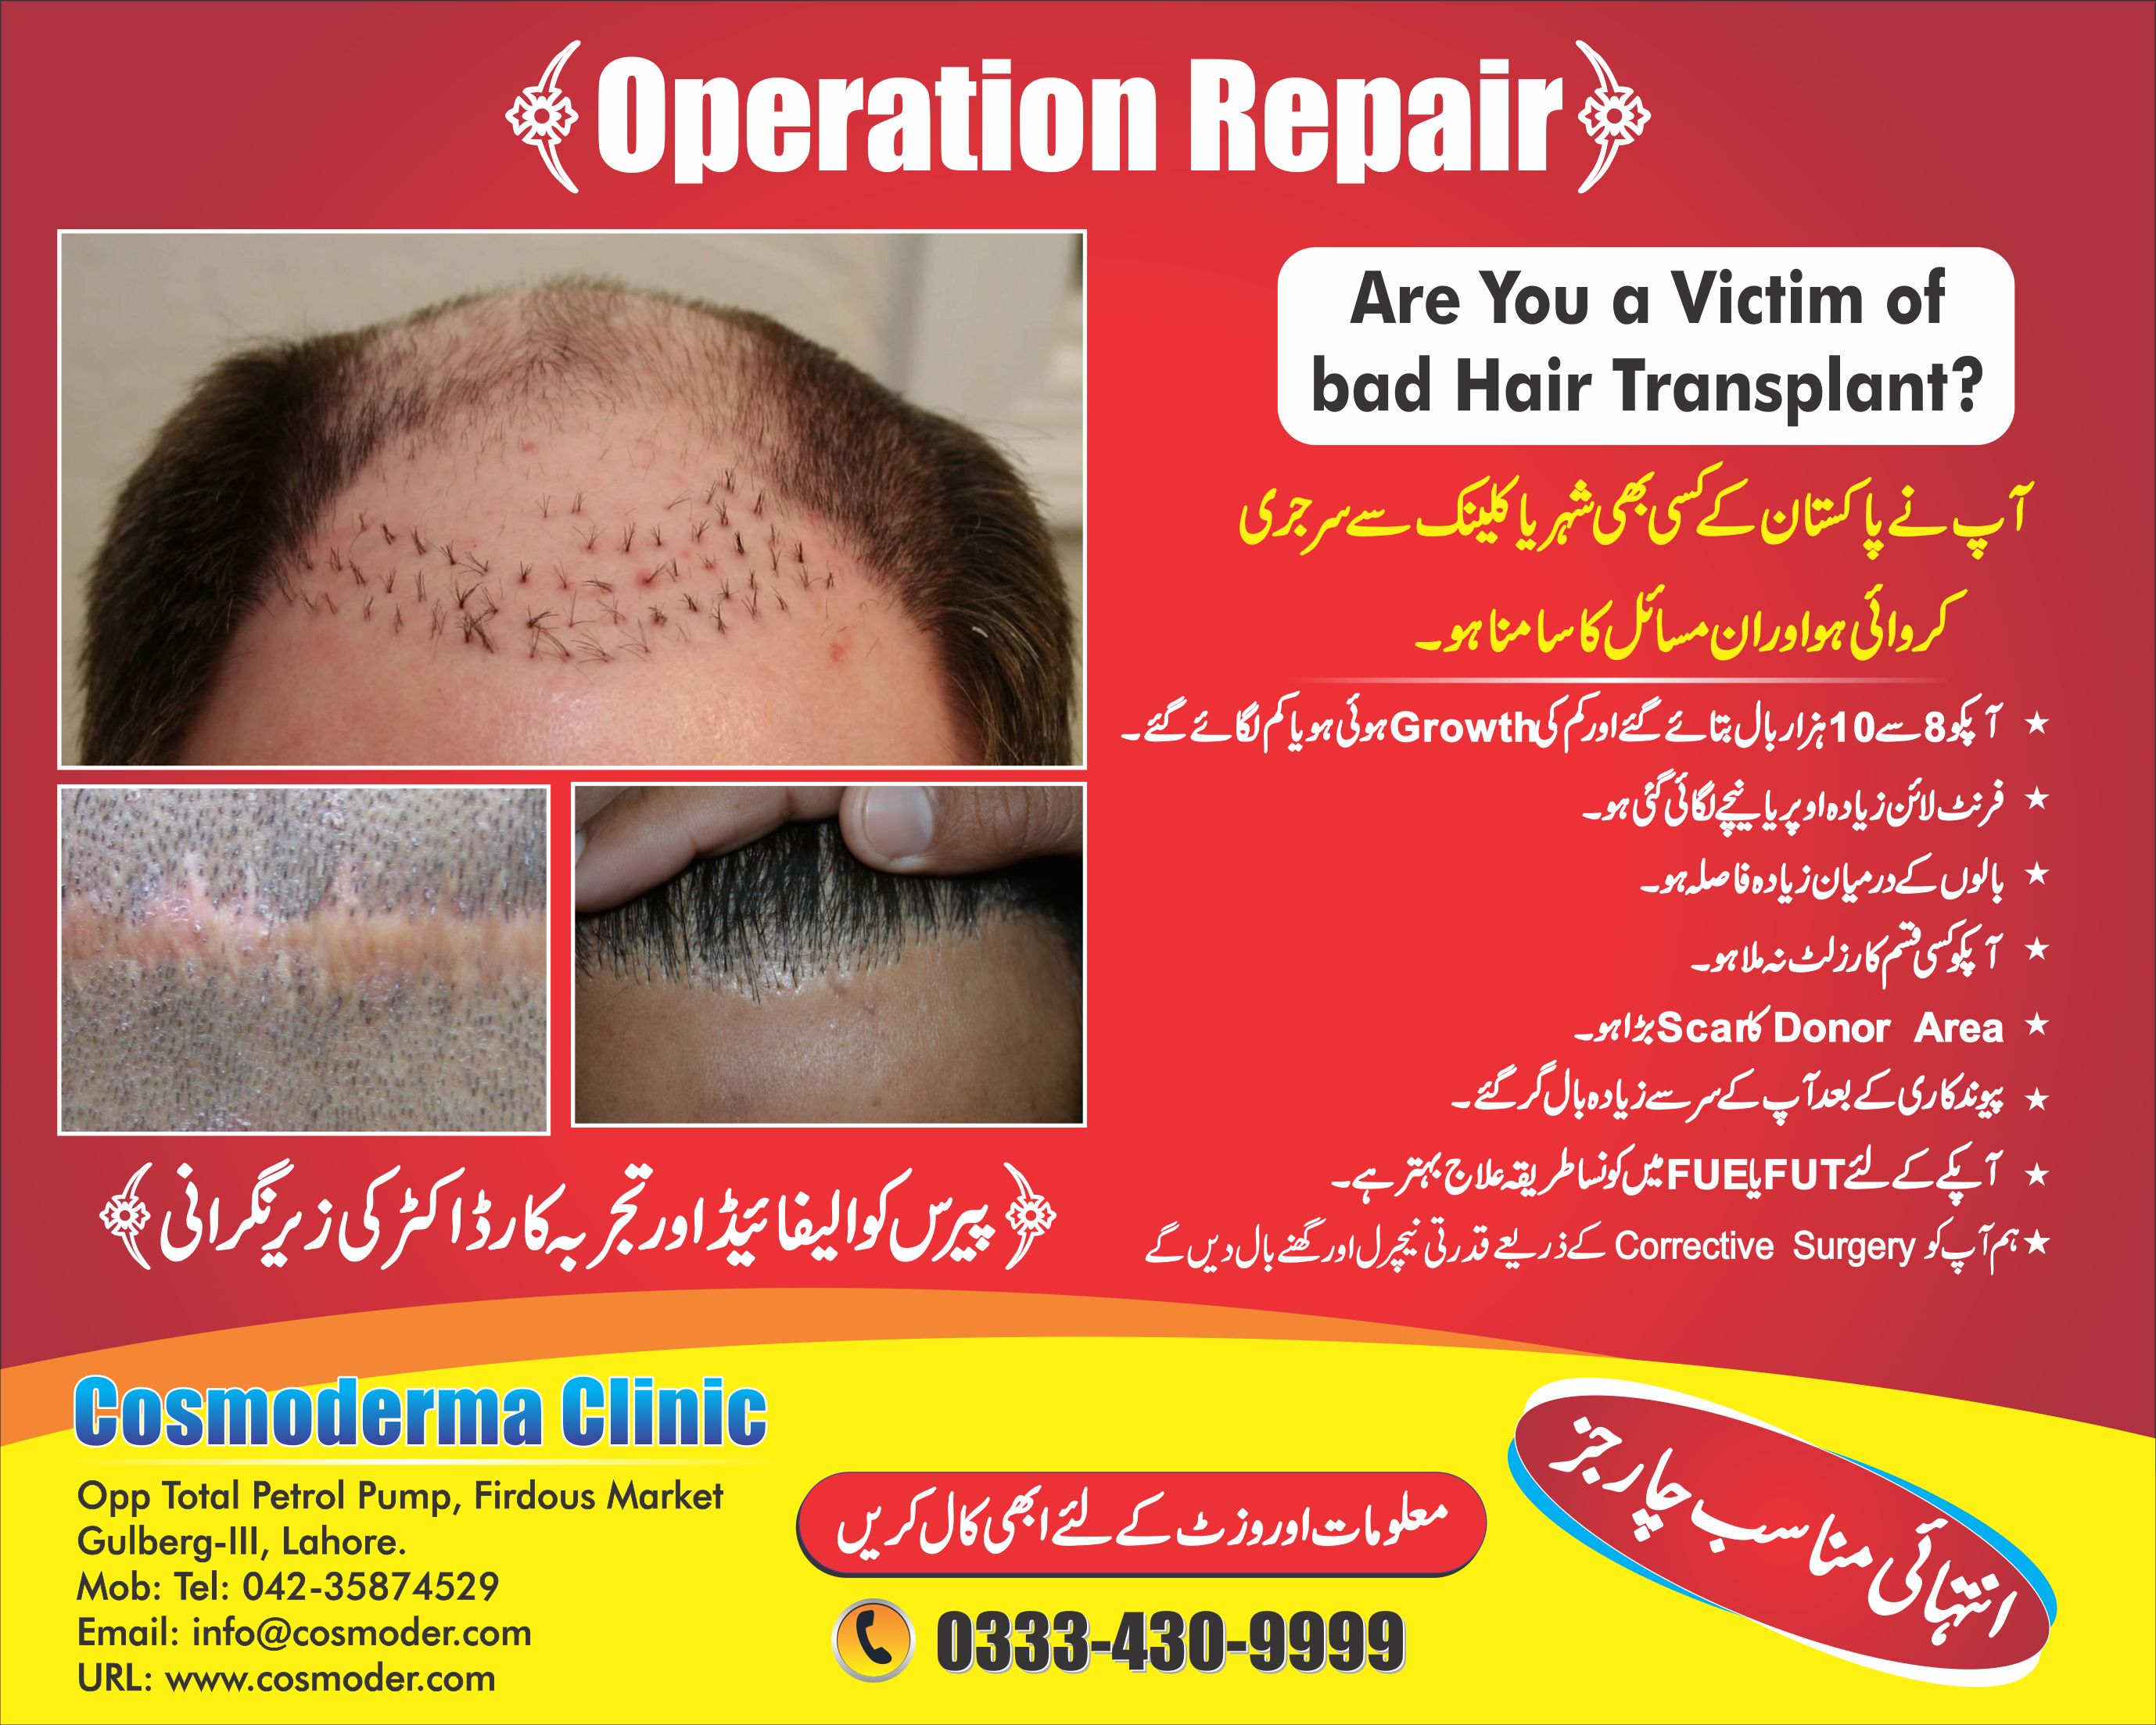 Hair Transplant discount-Off in Lahore | Cosmoderma Clinic | Free Advice